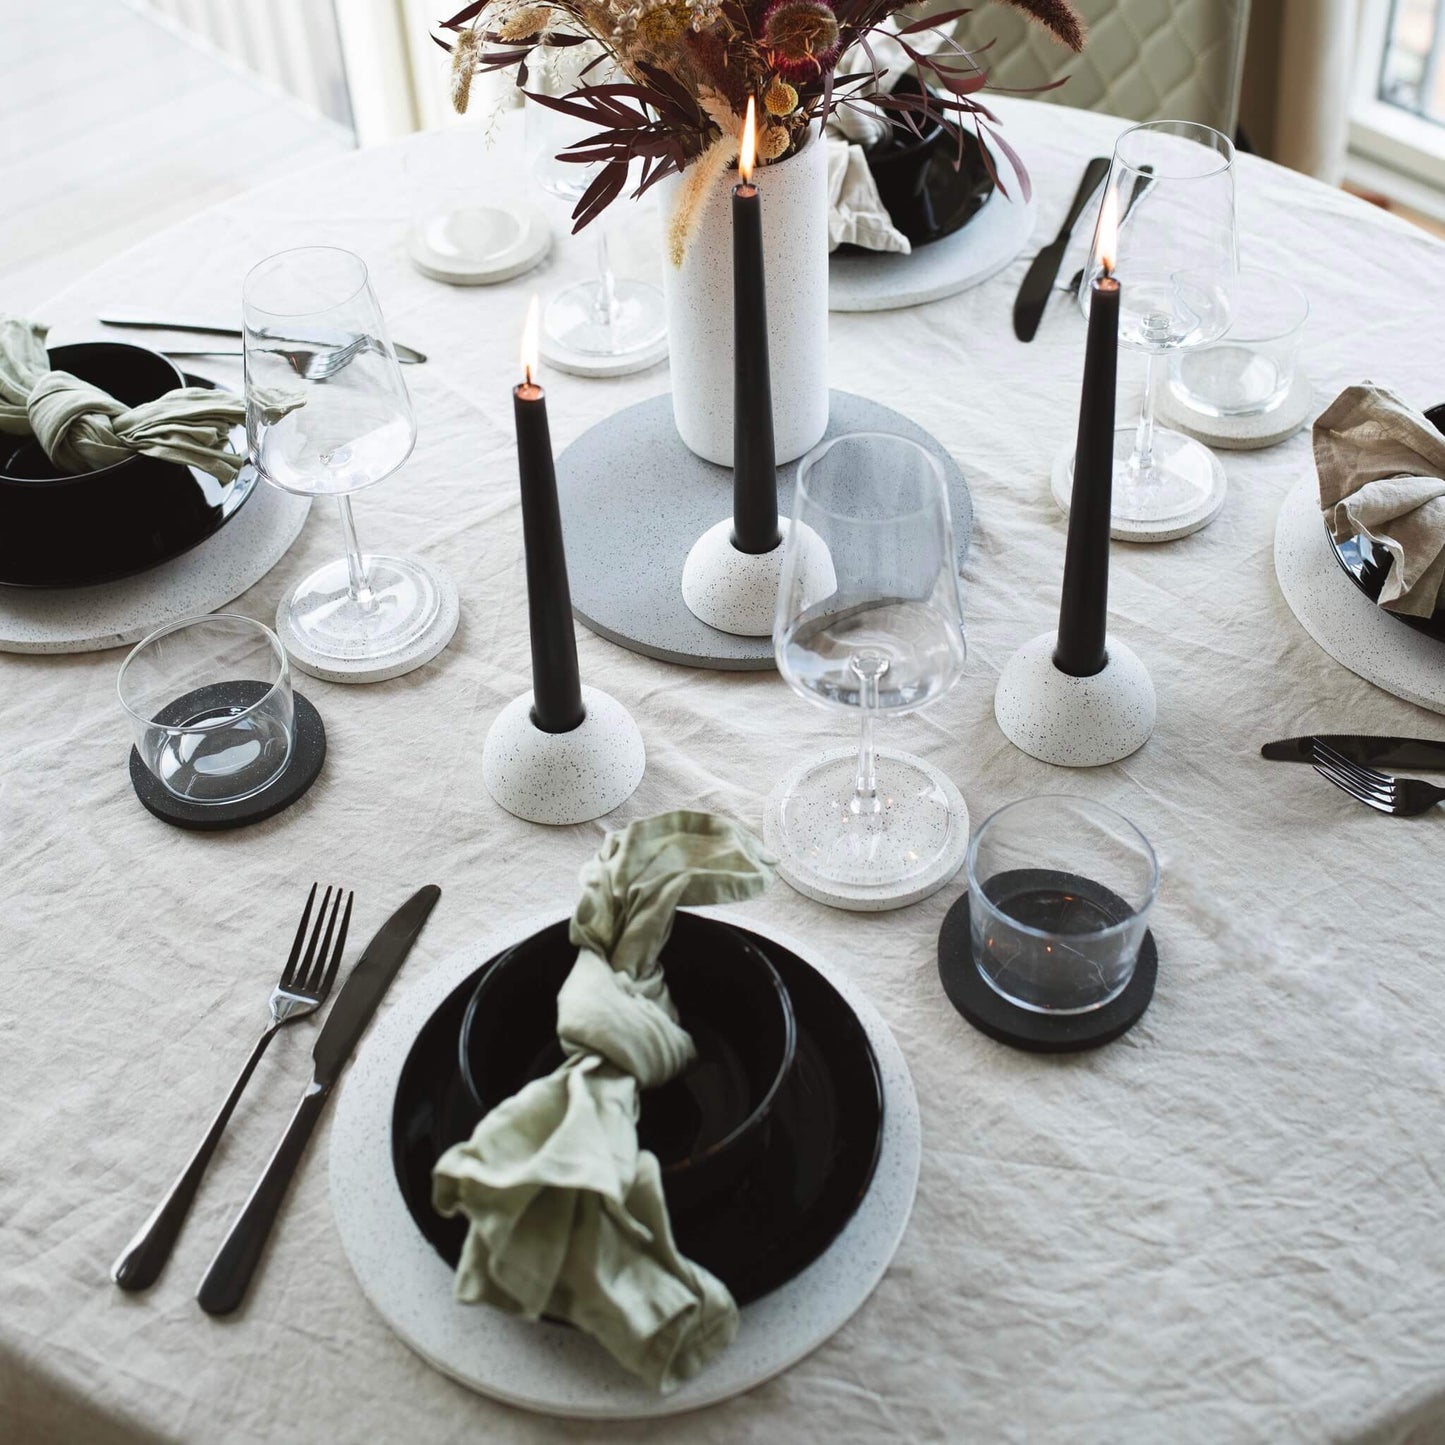 white eco concrete placemats, coasters and candlestick holders in a table setting